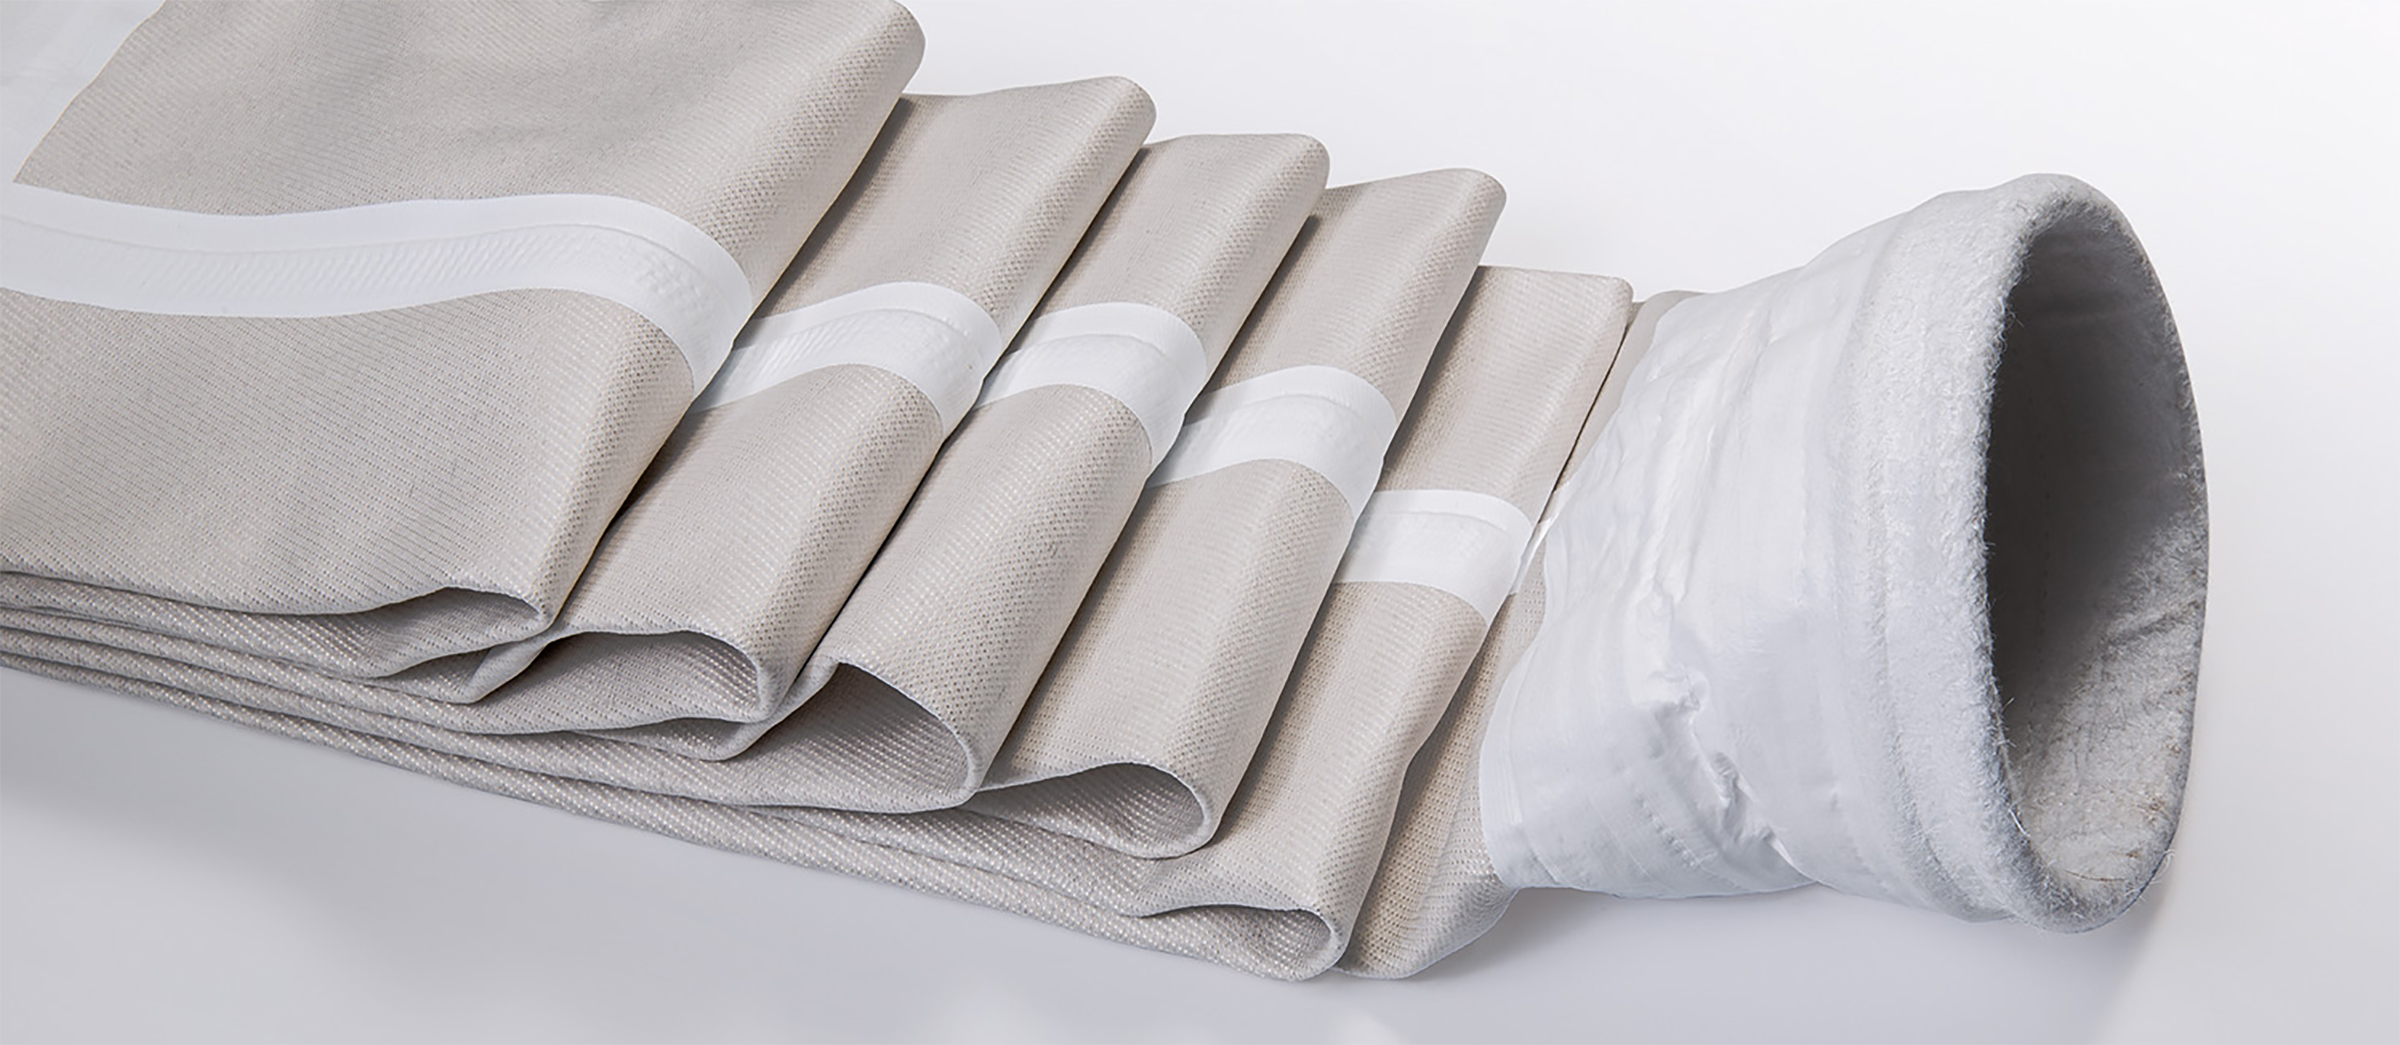 GORE® Low Emission Filter Bags